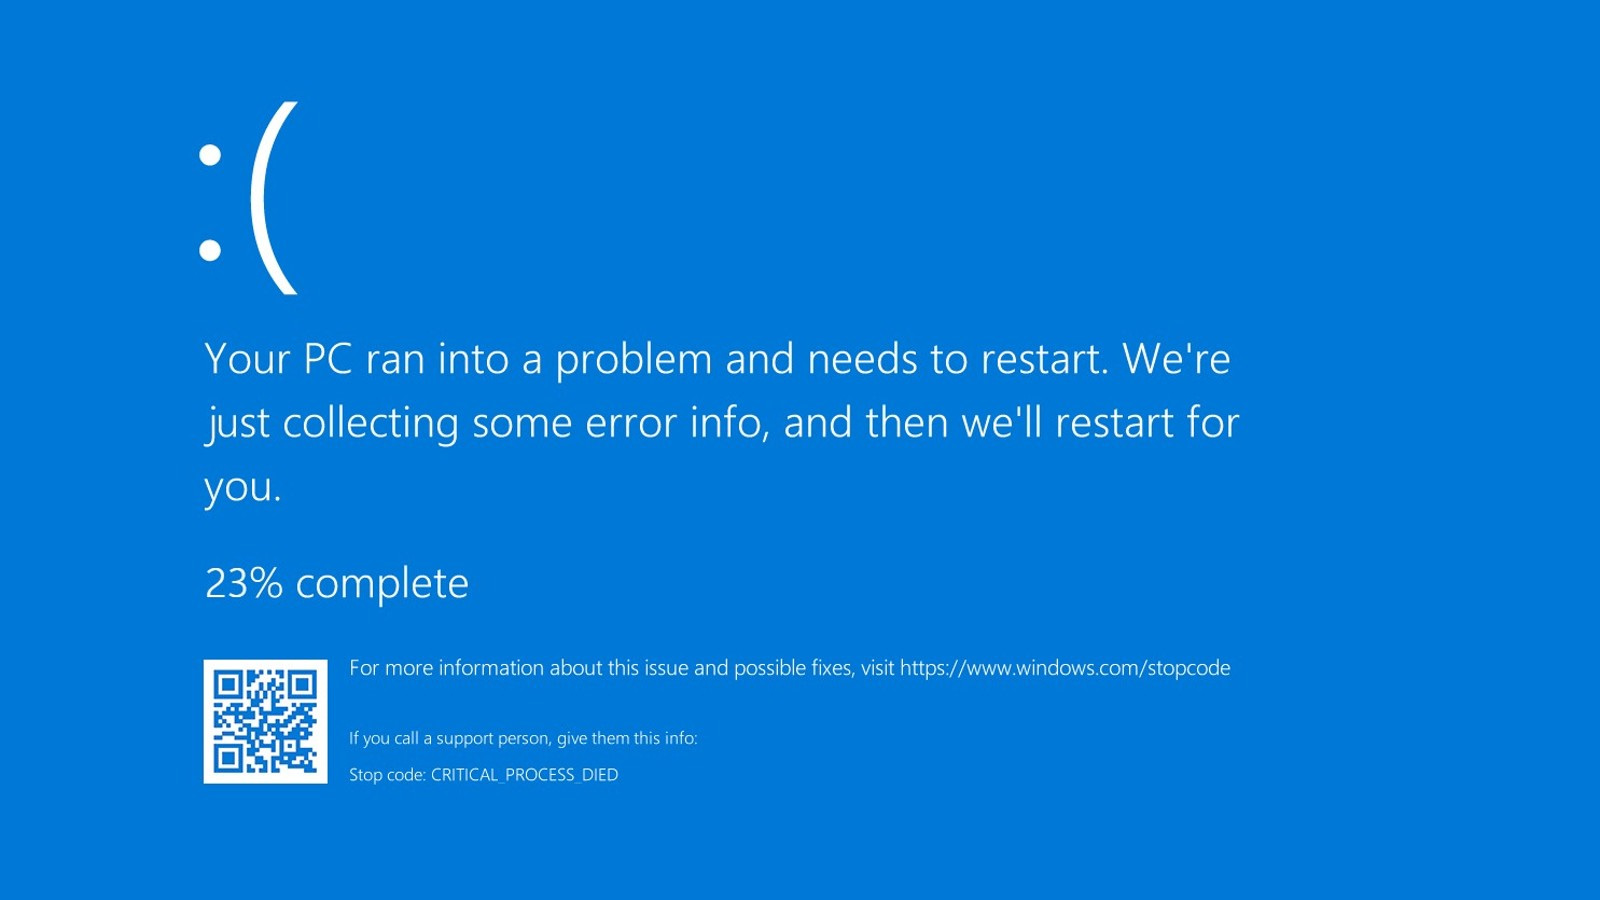 Blue screen of death (BSOD) Windows 10 critical process died computer issue